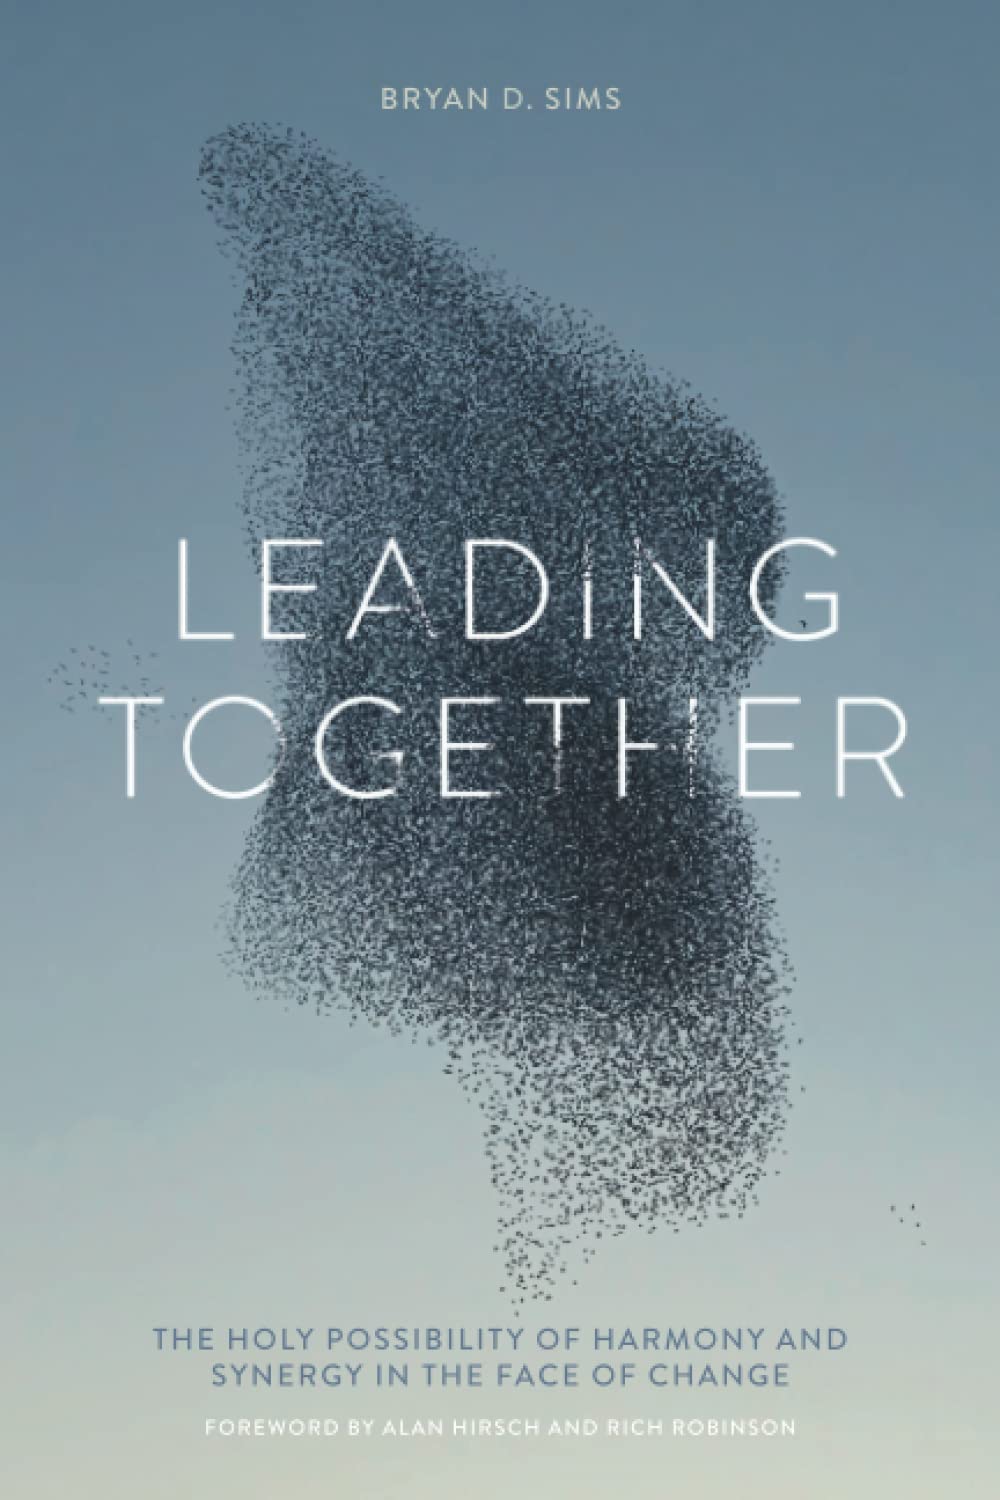 Leading Together: The Holy Possibility of Harmony and Synergy in the Face of Change image